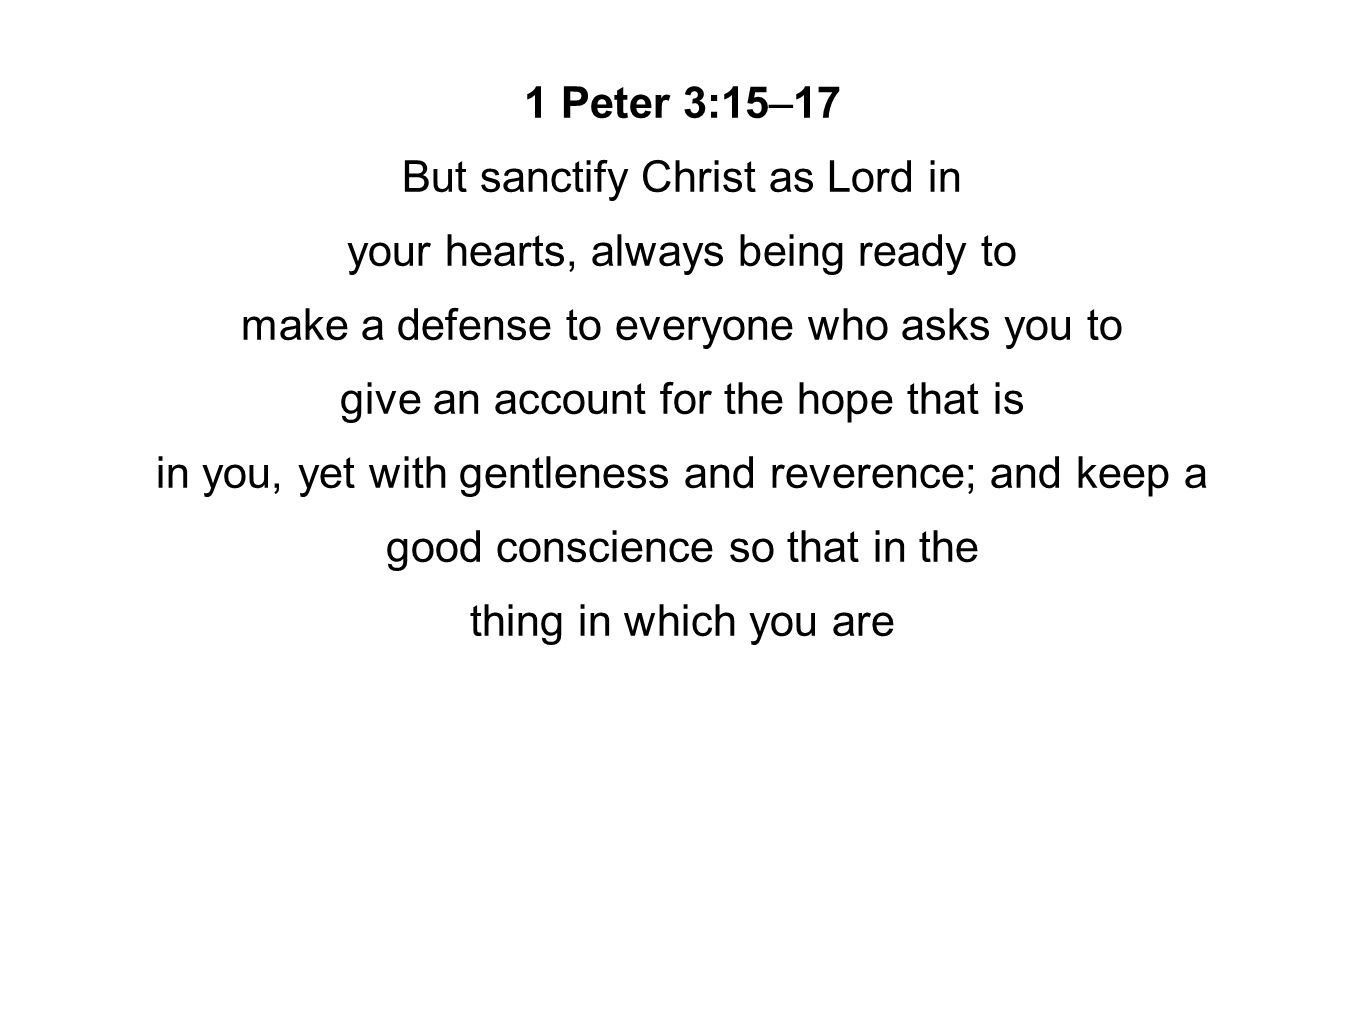 1 Peter 3:15–17 But sanctify Christ as Lord in your hearts, always being ready to make a defense to everyone who asks you to give an account for the hope that is in you, yet with gentleness and reverence; and keep a good conscience so that in the thing in which you are